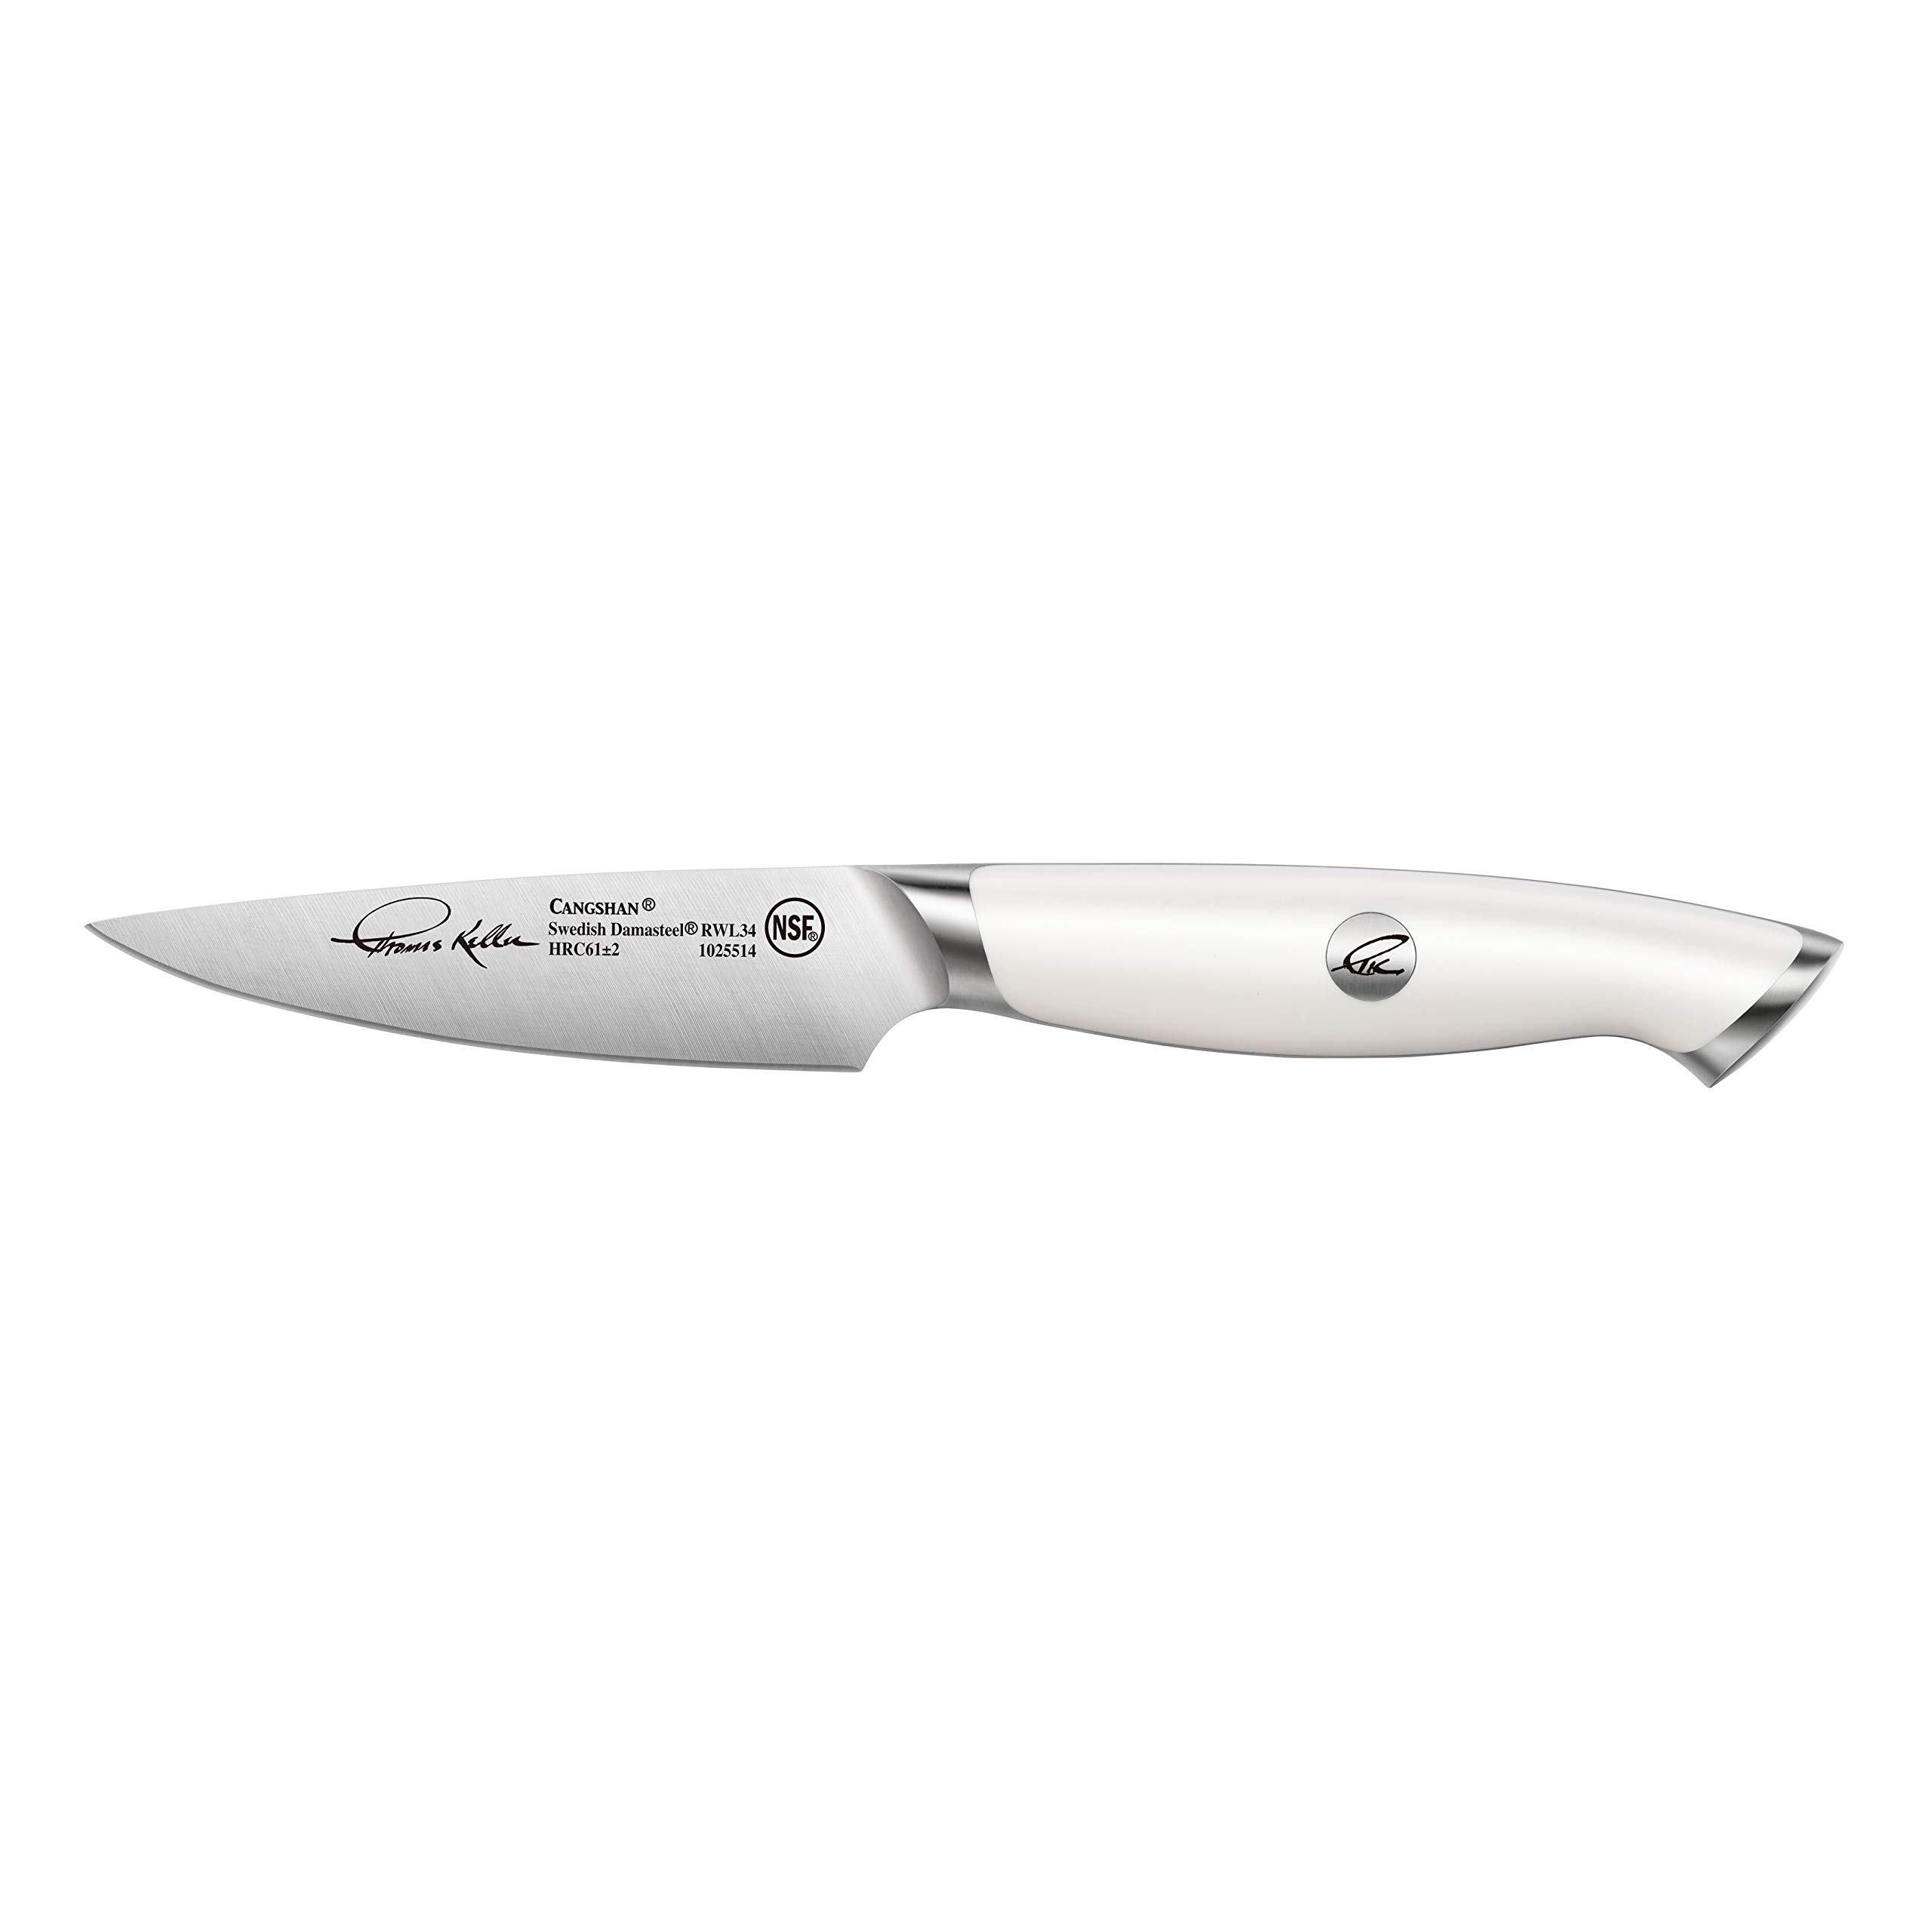 Cangshan Thomas Keller Signature Collection Swedish Powder Steel Forged, 3.5" Paring Knife, White